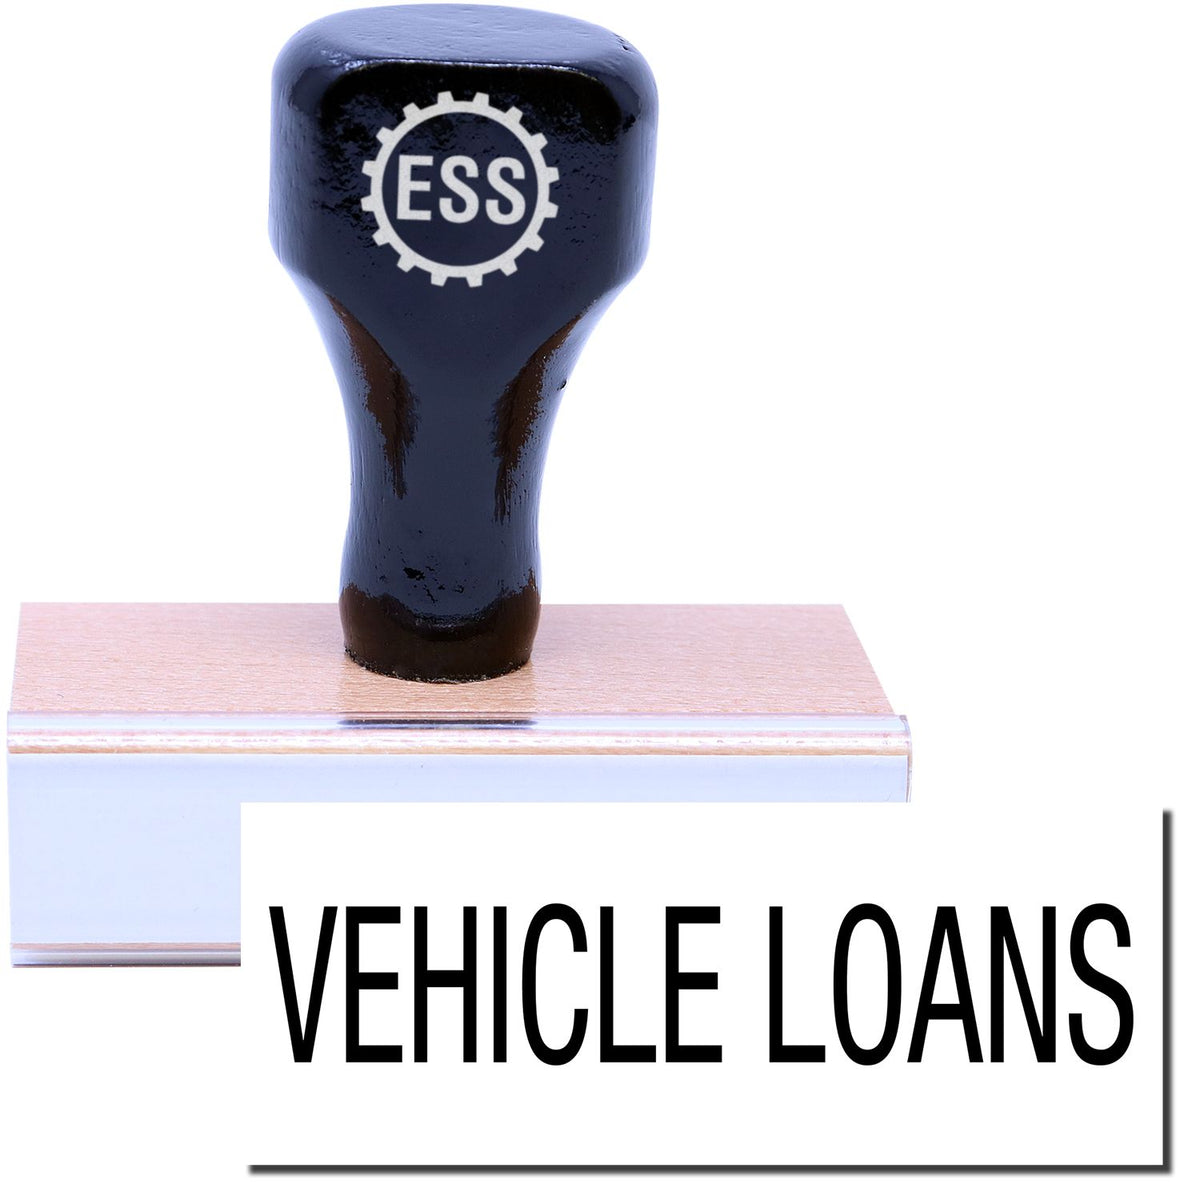 A stock office rubber stamp with a stamped image showing how the text &quot;VEHICLE LOANS&quot; in a large font is displayed after stamping.